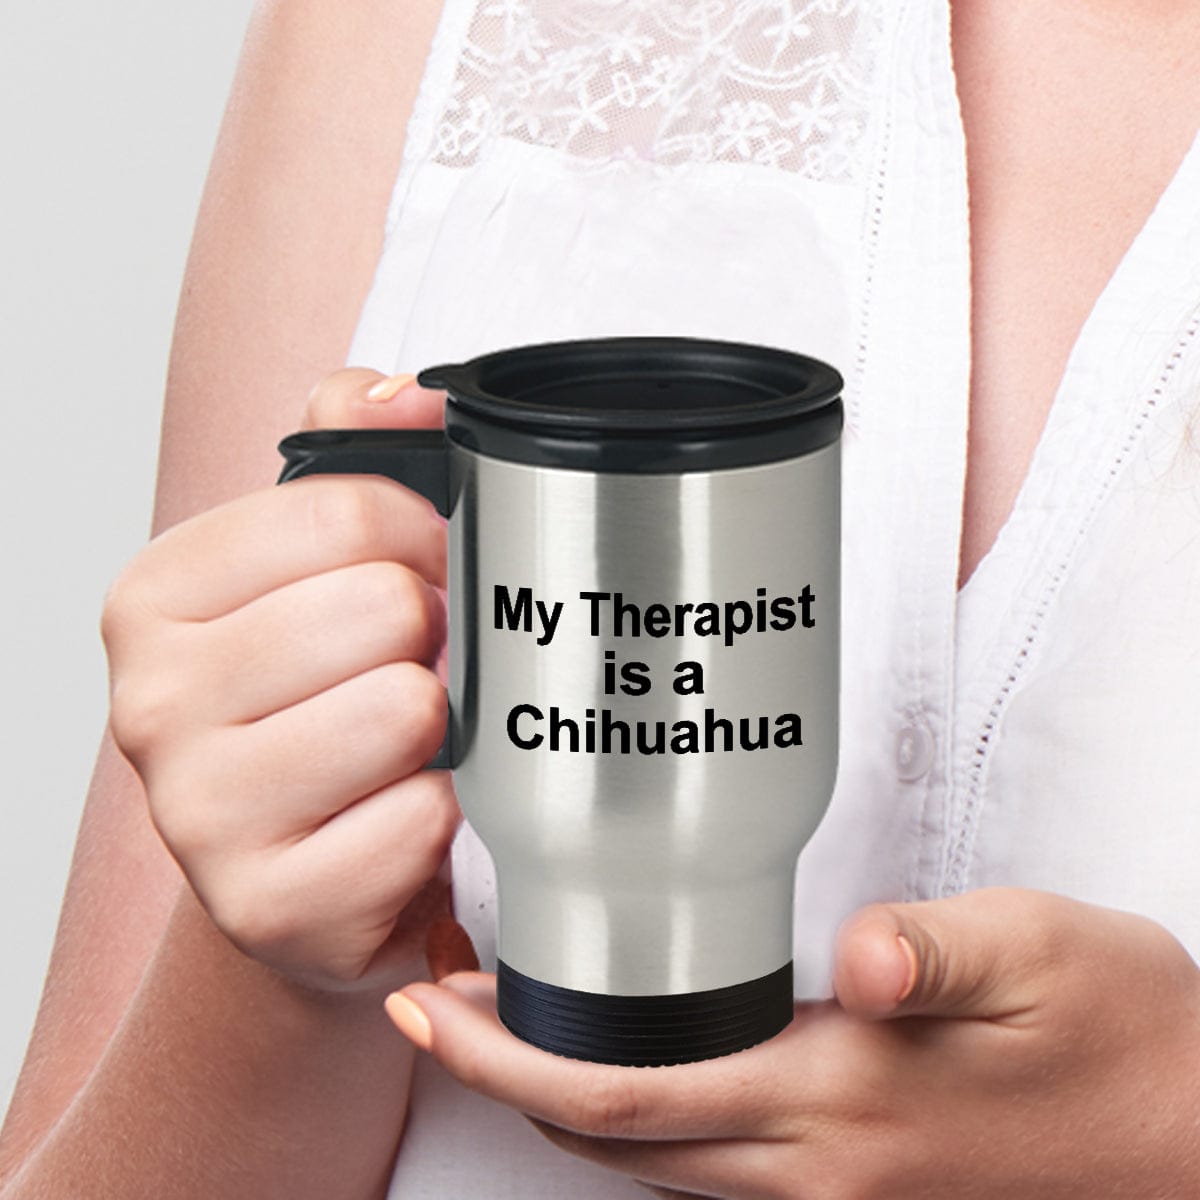 Chihuahua Dog Lover Gift Therapist Birthday Father's Day Stainless Steel Insulated Travel Coffee Mug